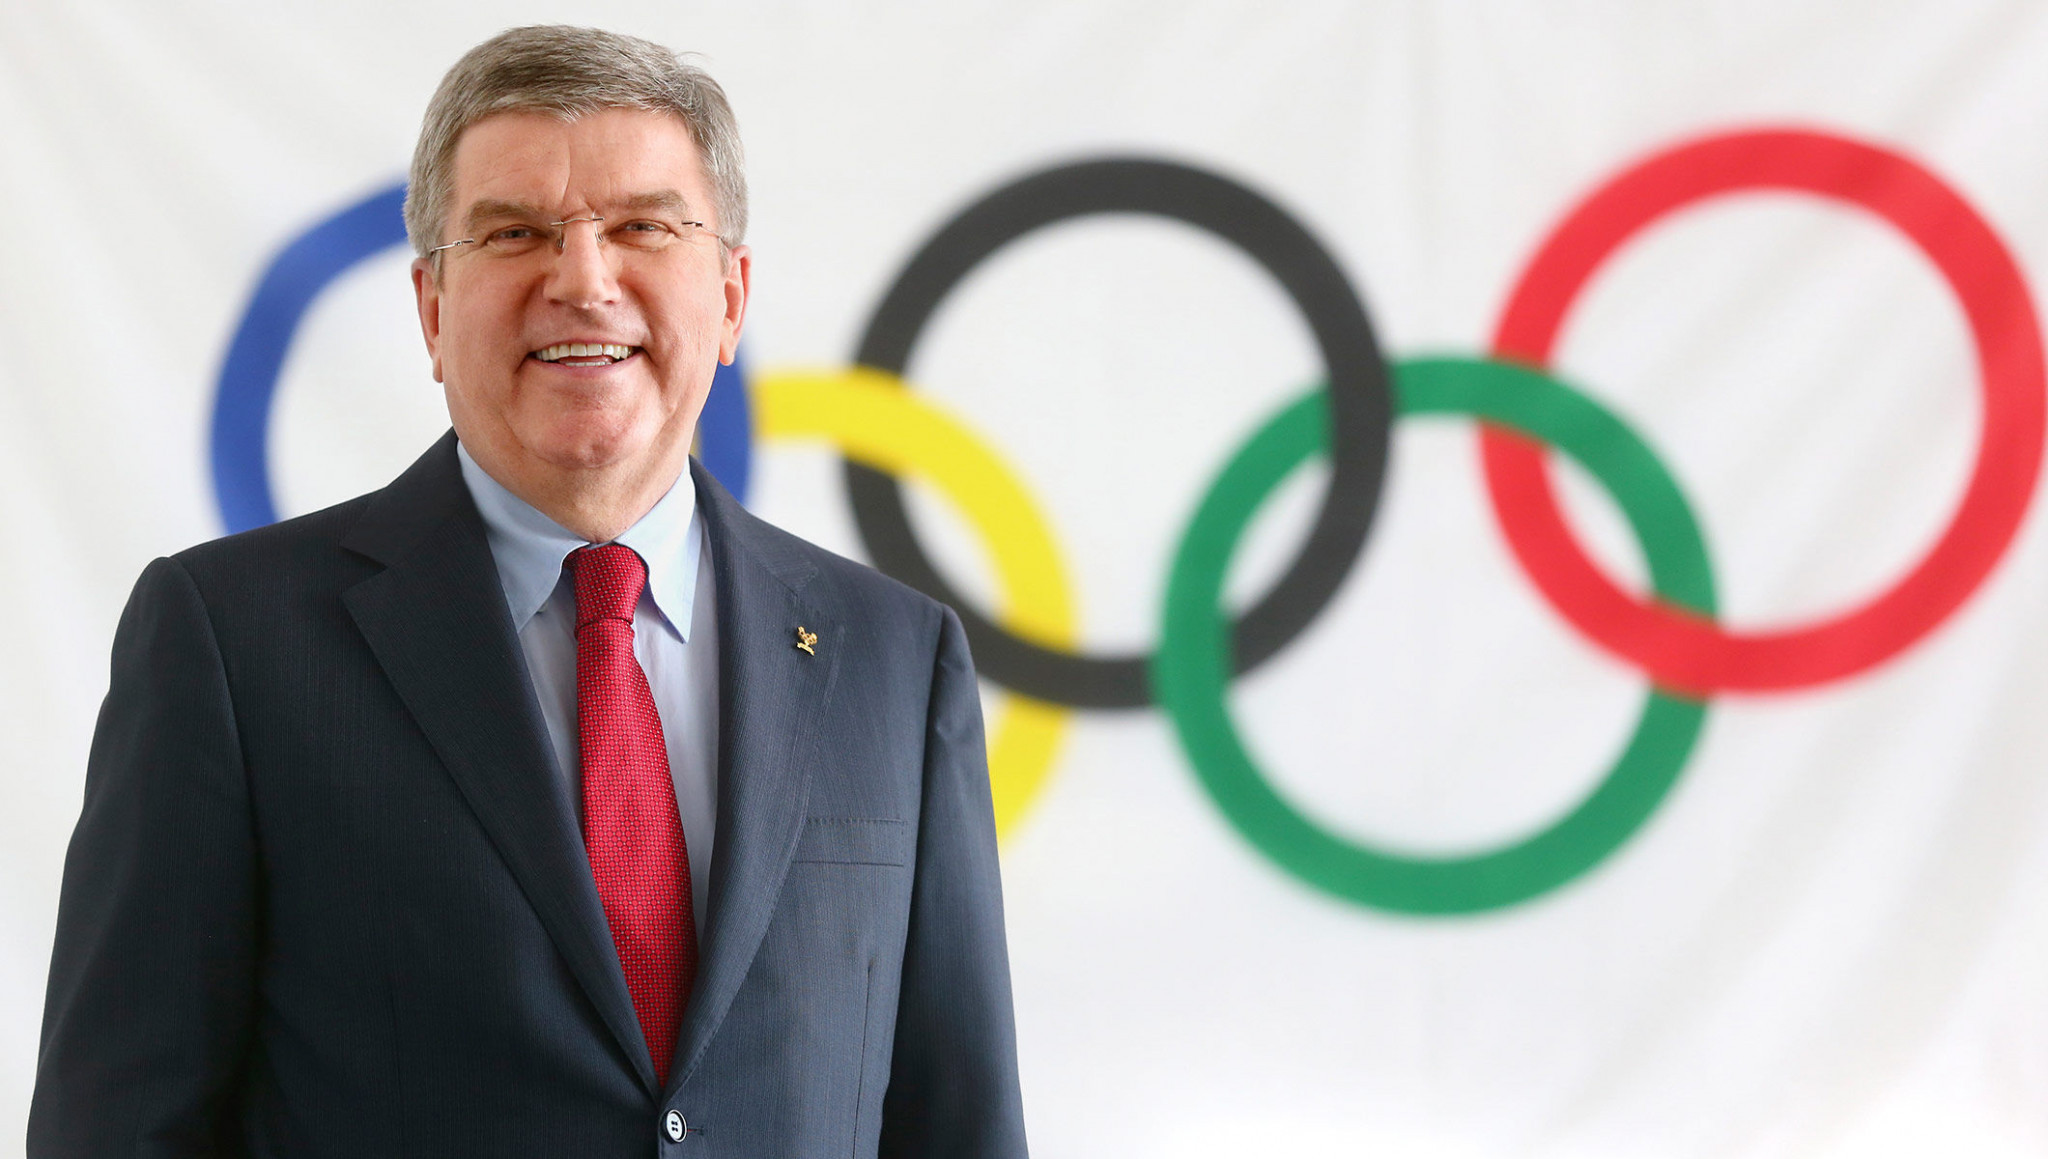 Thomas Bach focused upon Pyeongchang 2018 in his New Year's message today ©IOC